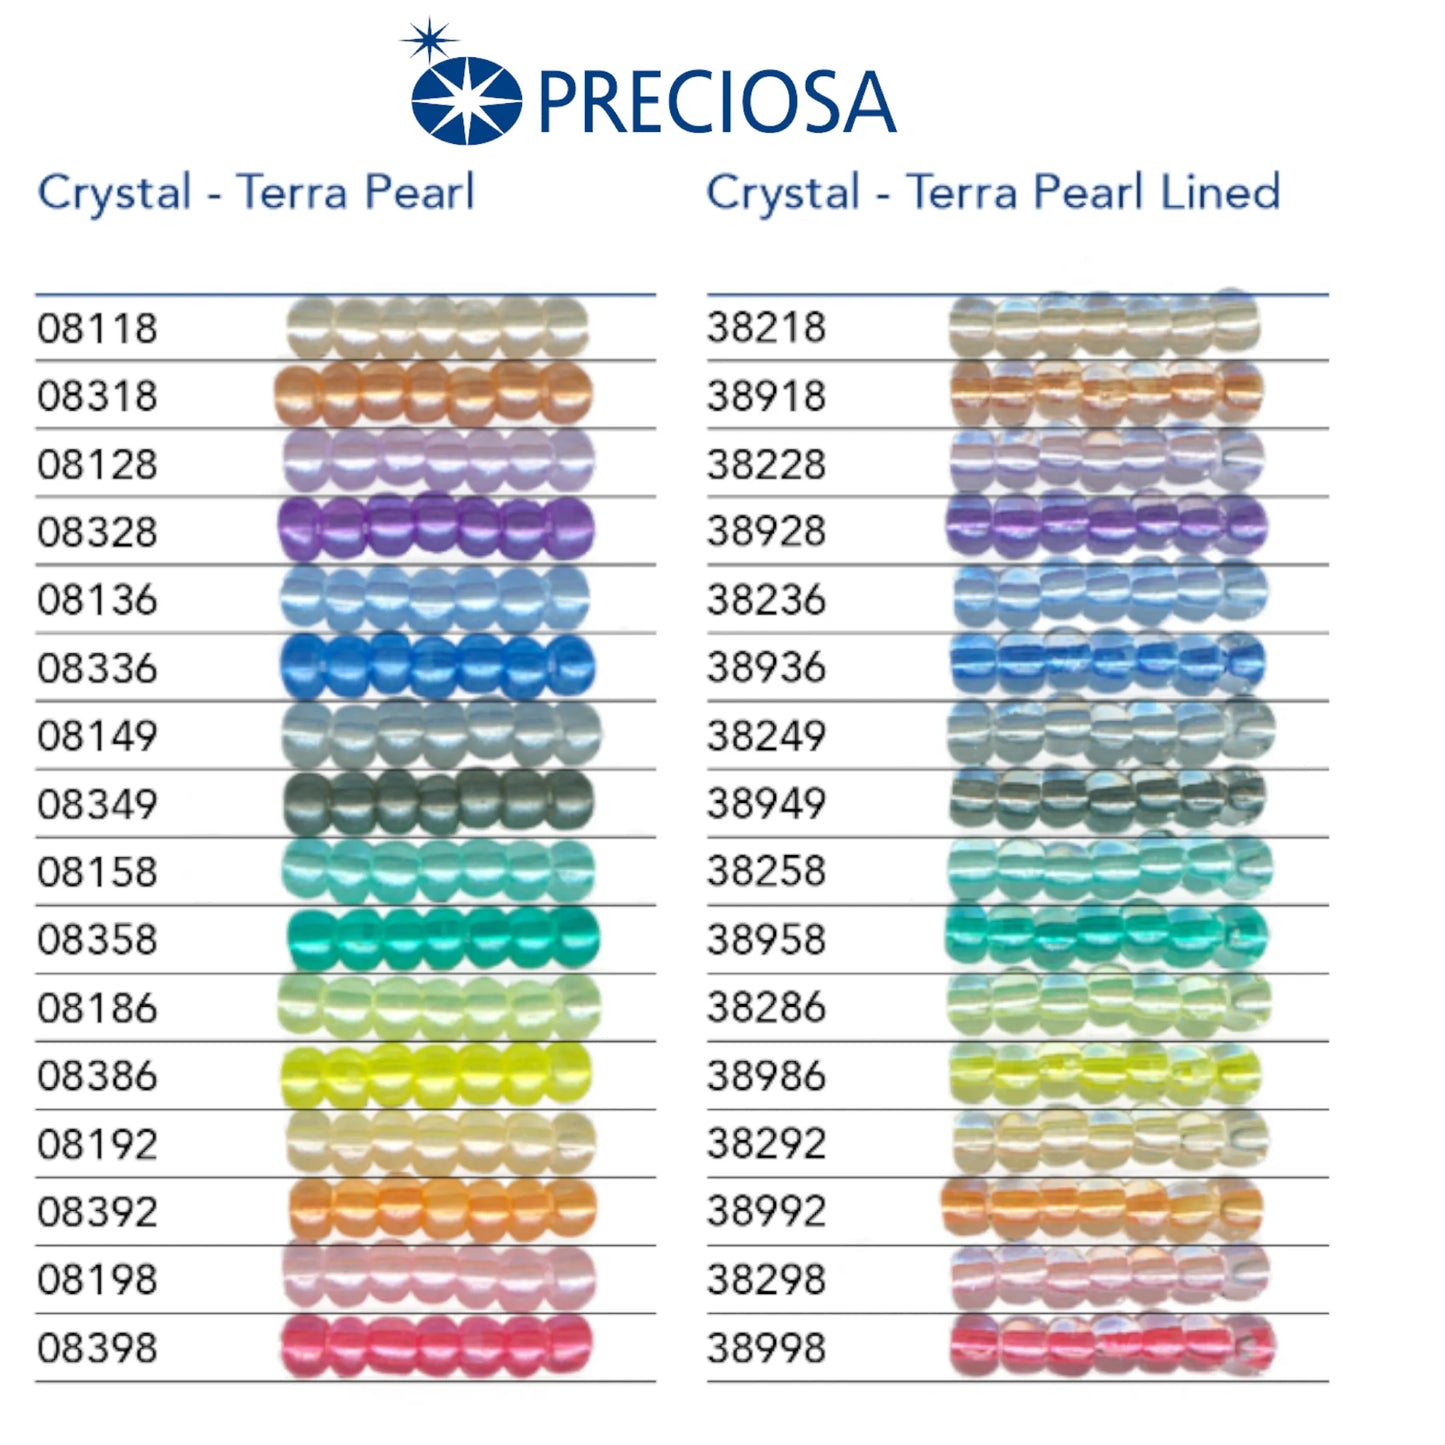 38958 Czech seed beads PRECIOSA Rocailles 10/0 turquoise. Crystal - Terra Pearl Lined.